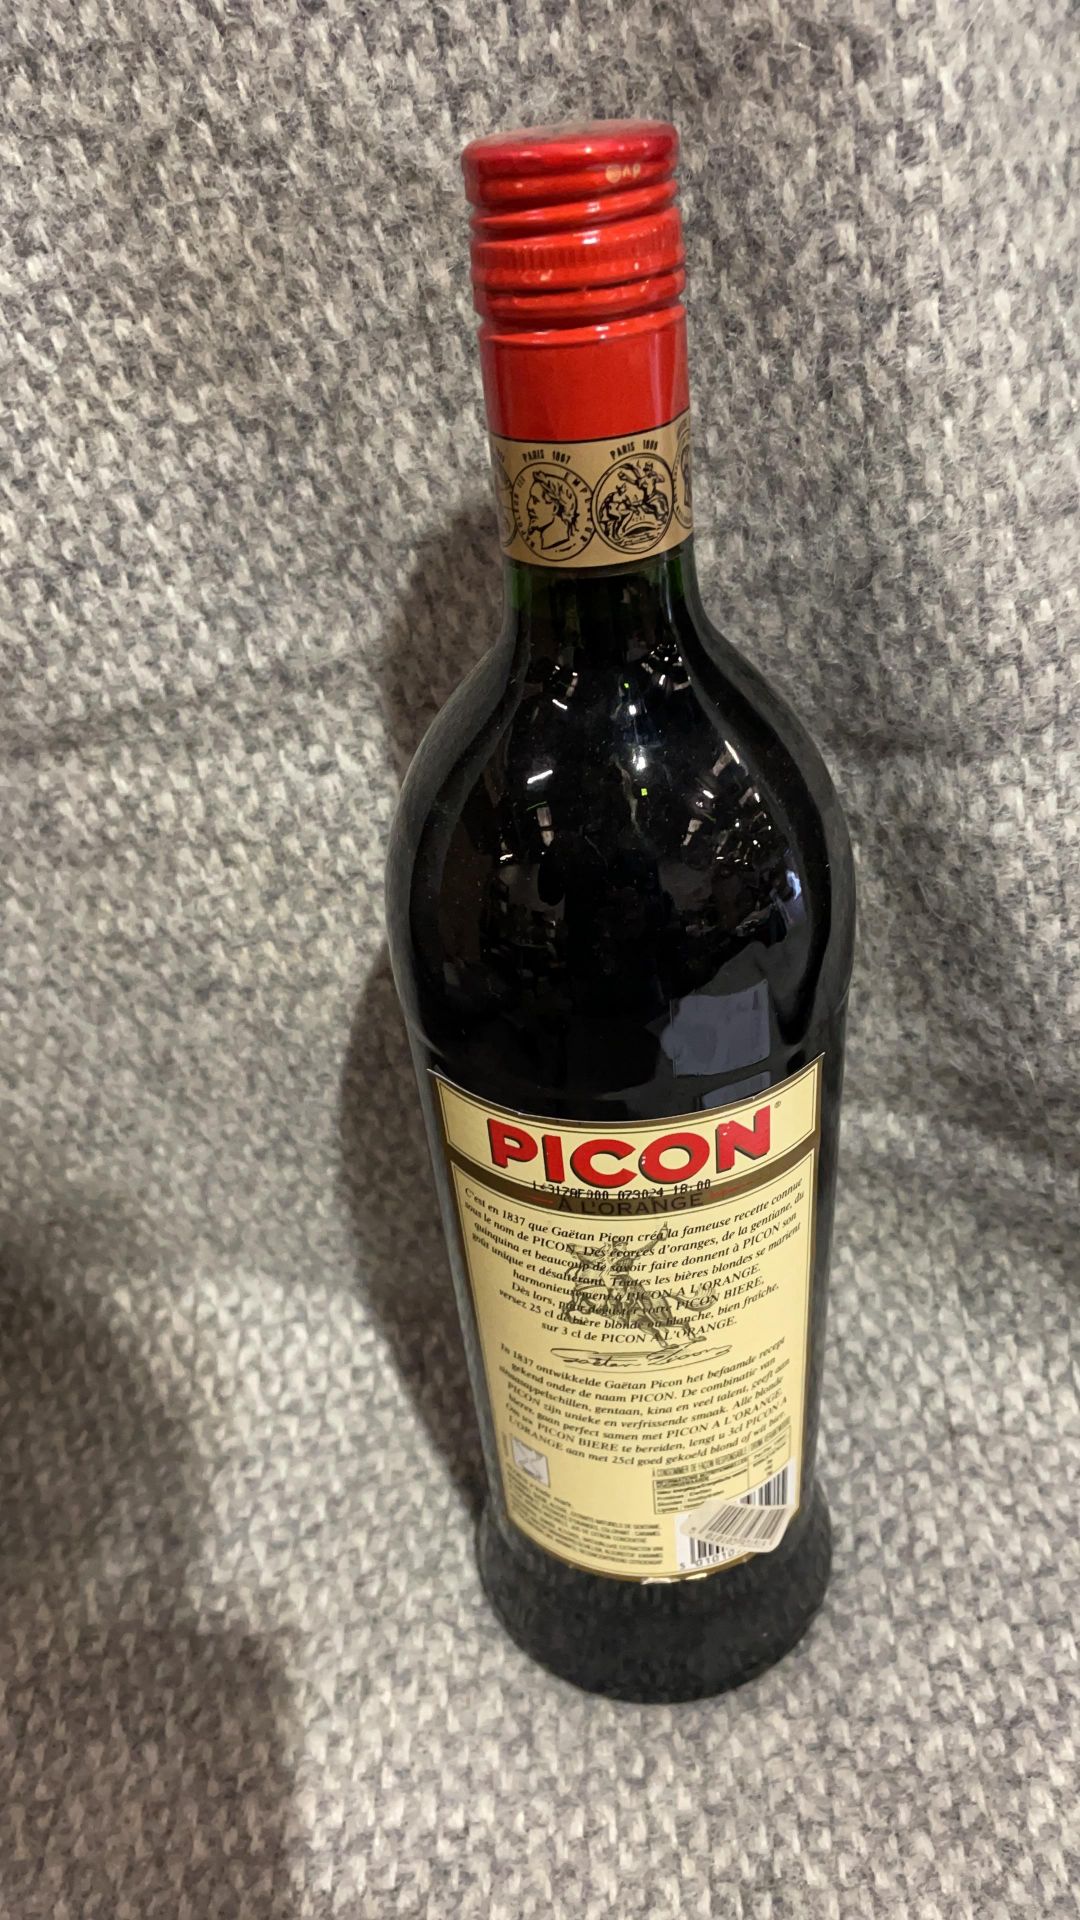 Picon Amer Bitter Aperitif France 1 Litre ( Bid Is For 1x Bottle Option To Purchase More)